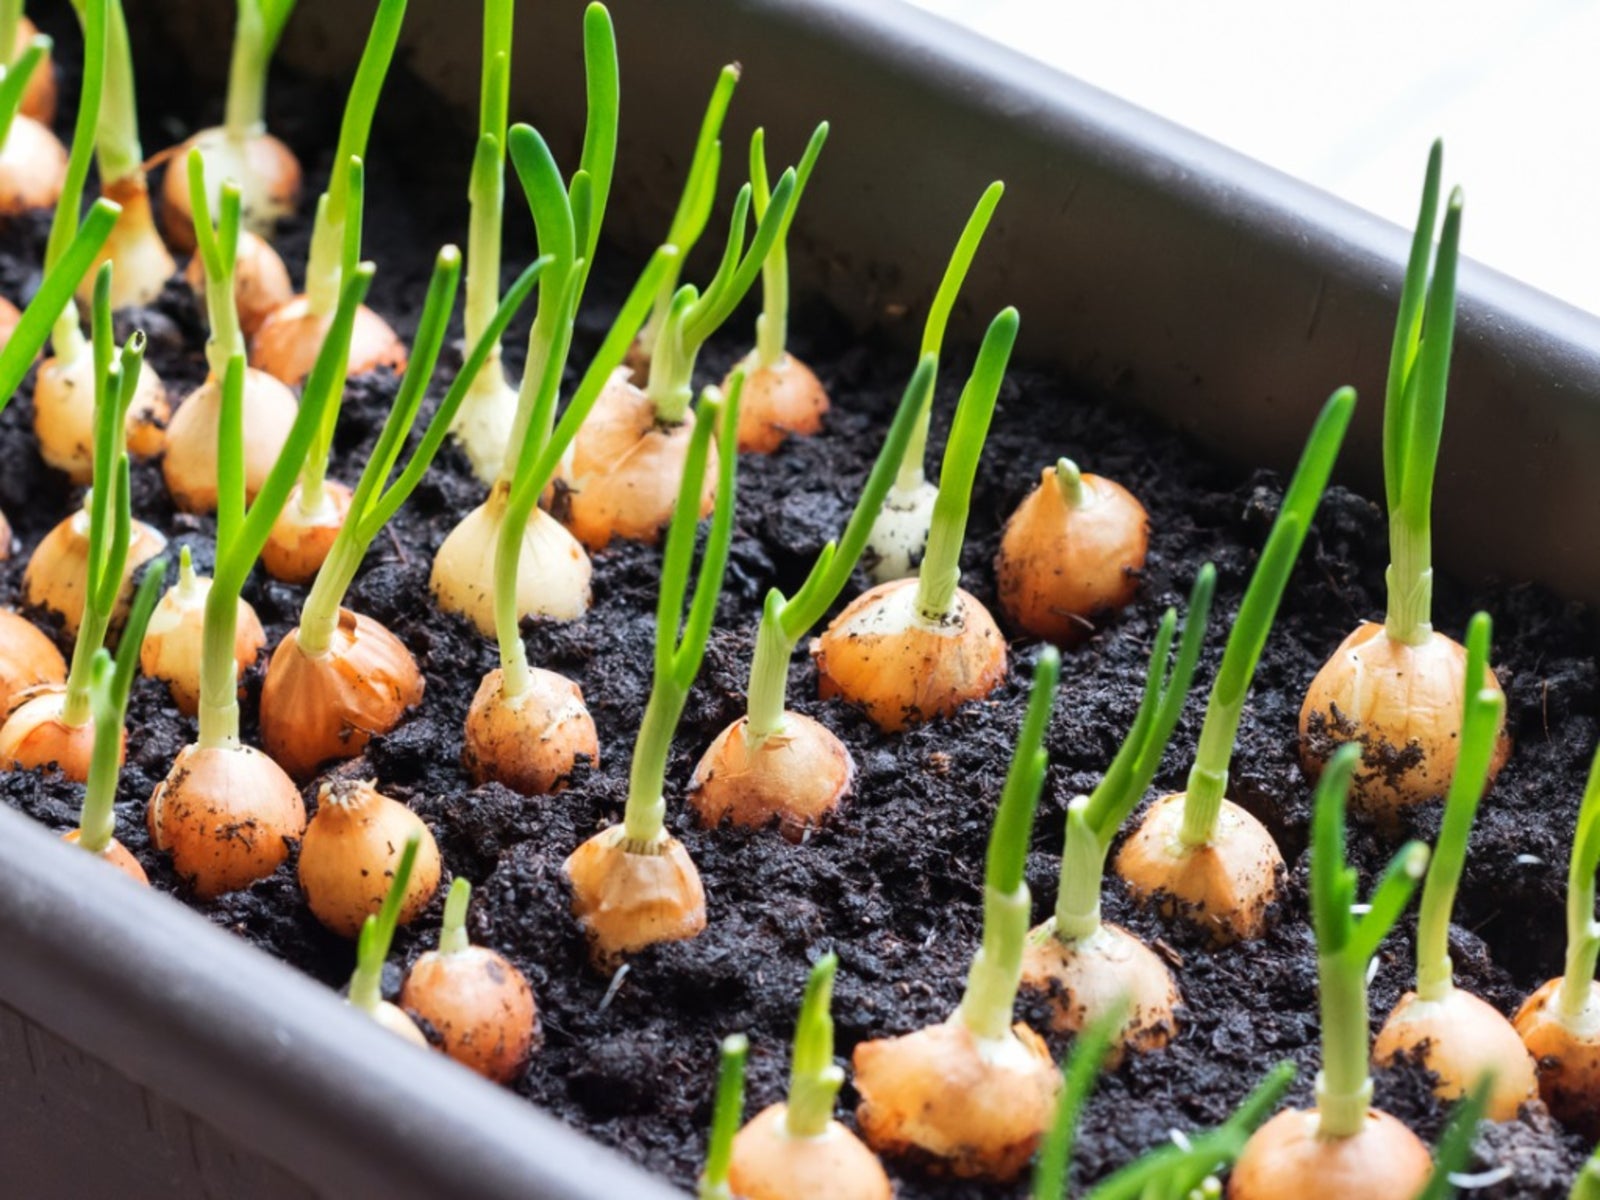 How To Plant Onion Seedlings